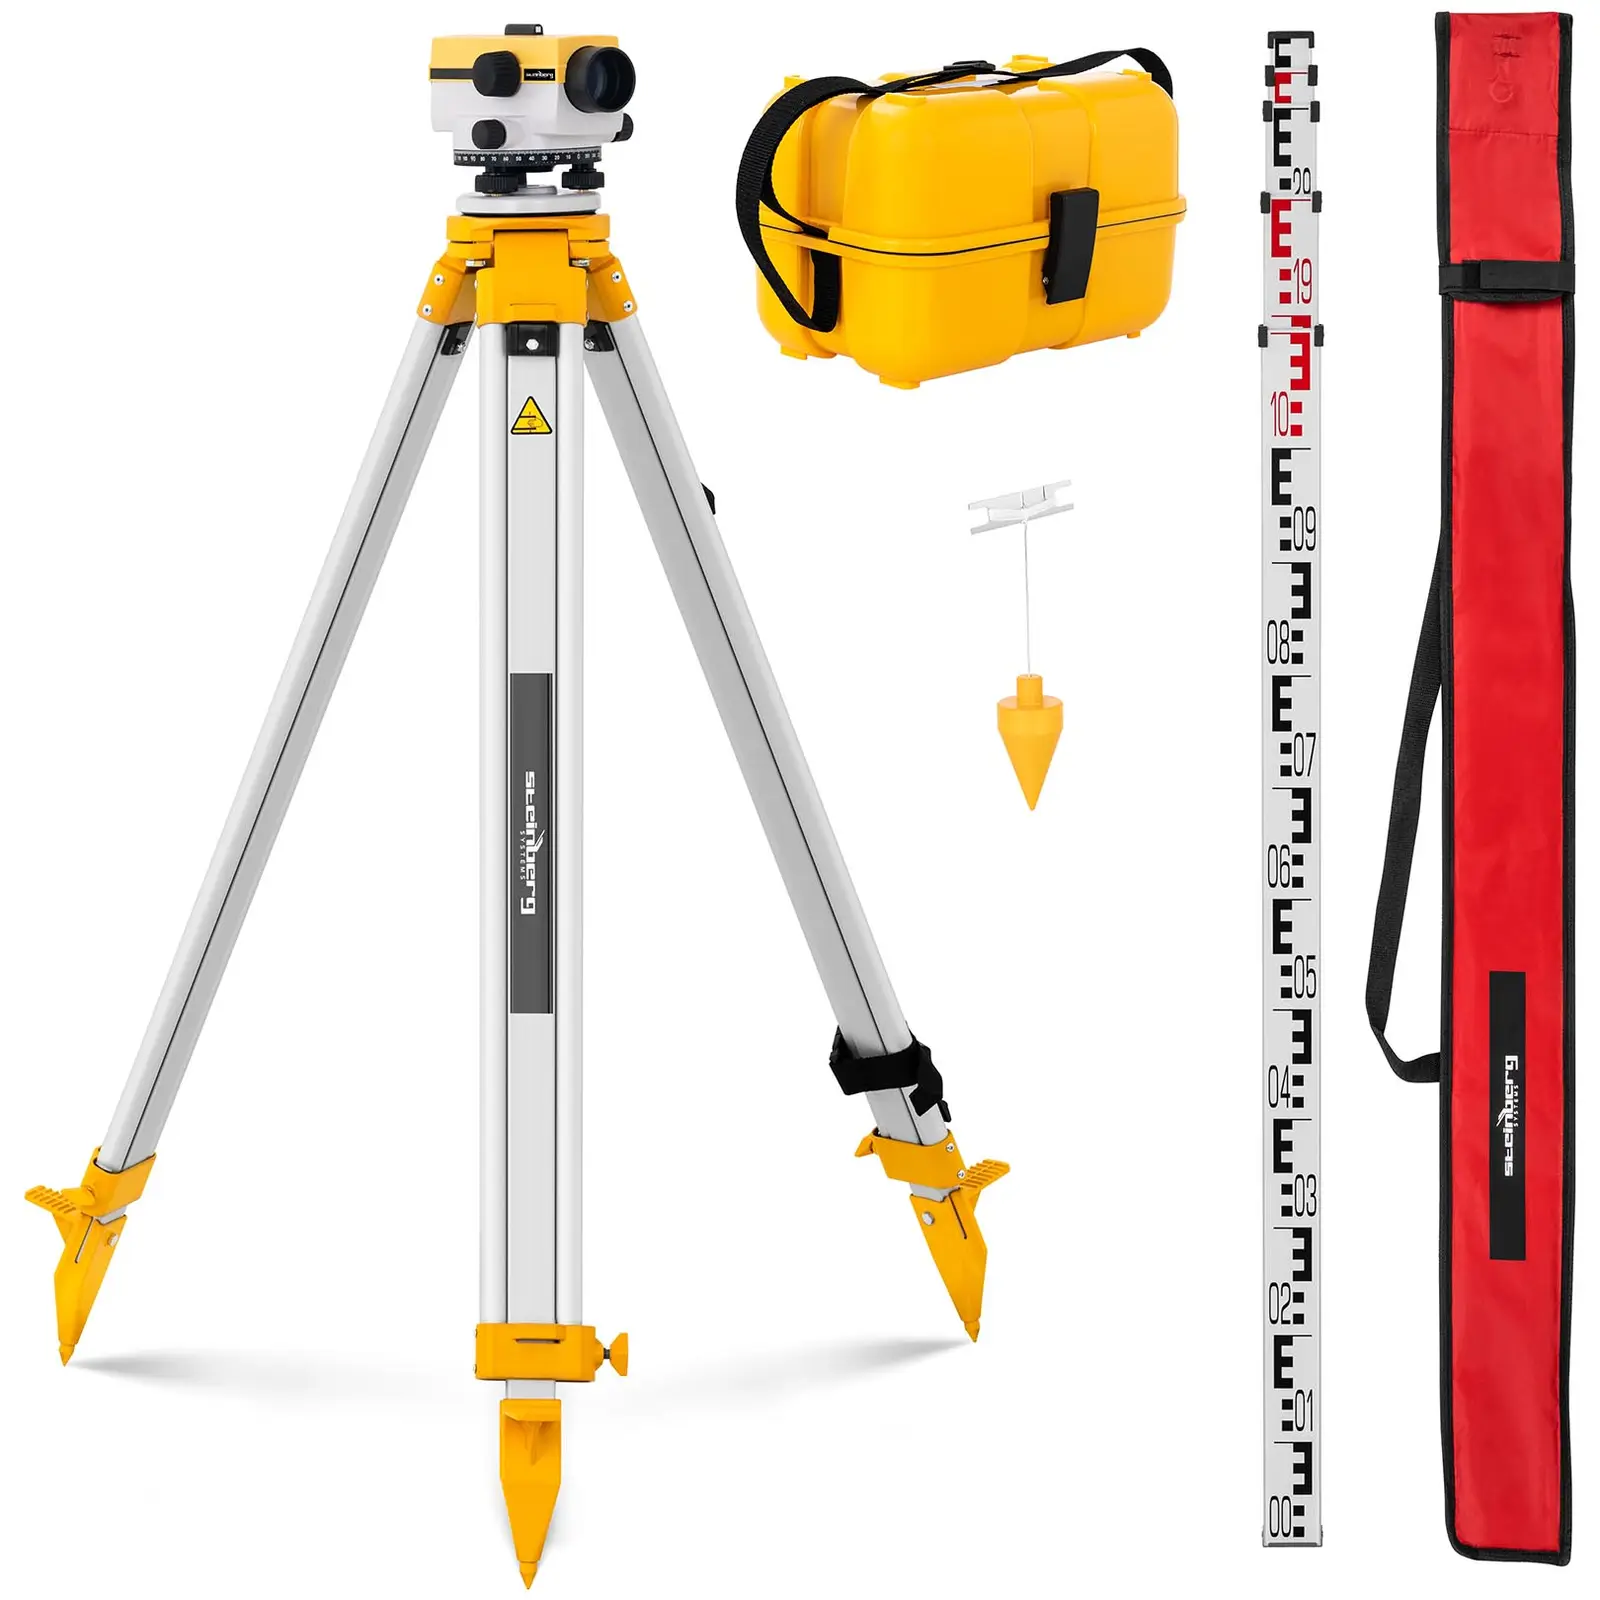 Factory second Automatic Level - with tripod and level staff - 32x magnification - 40 mm lens - deviation 1 mm - air damped compensator